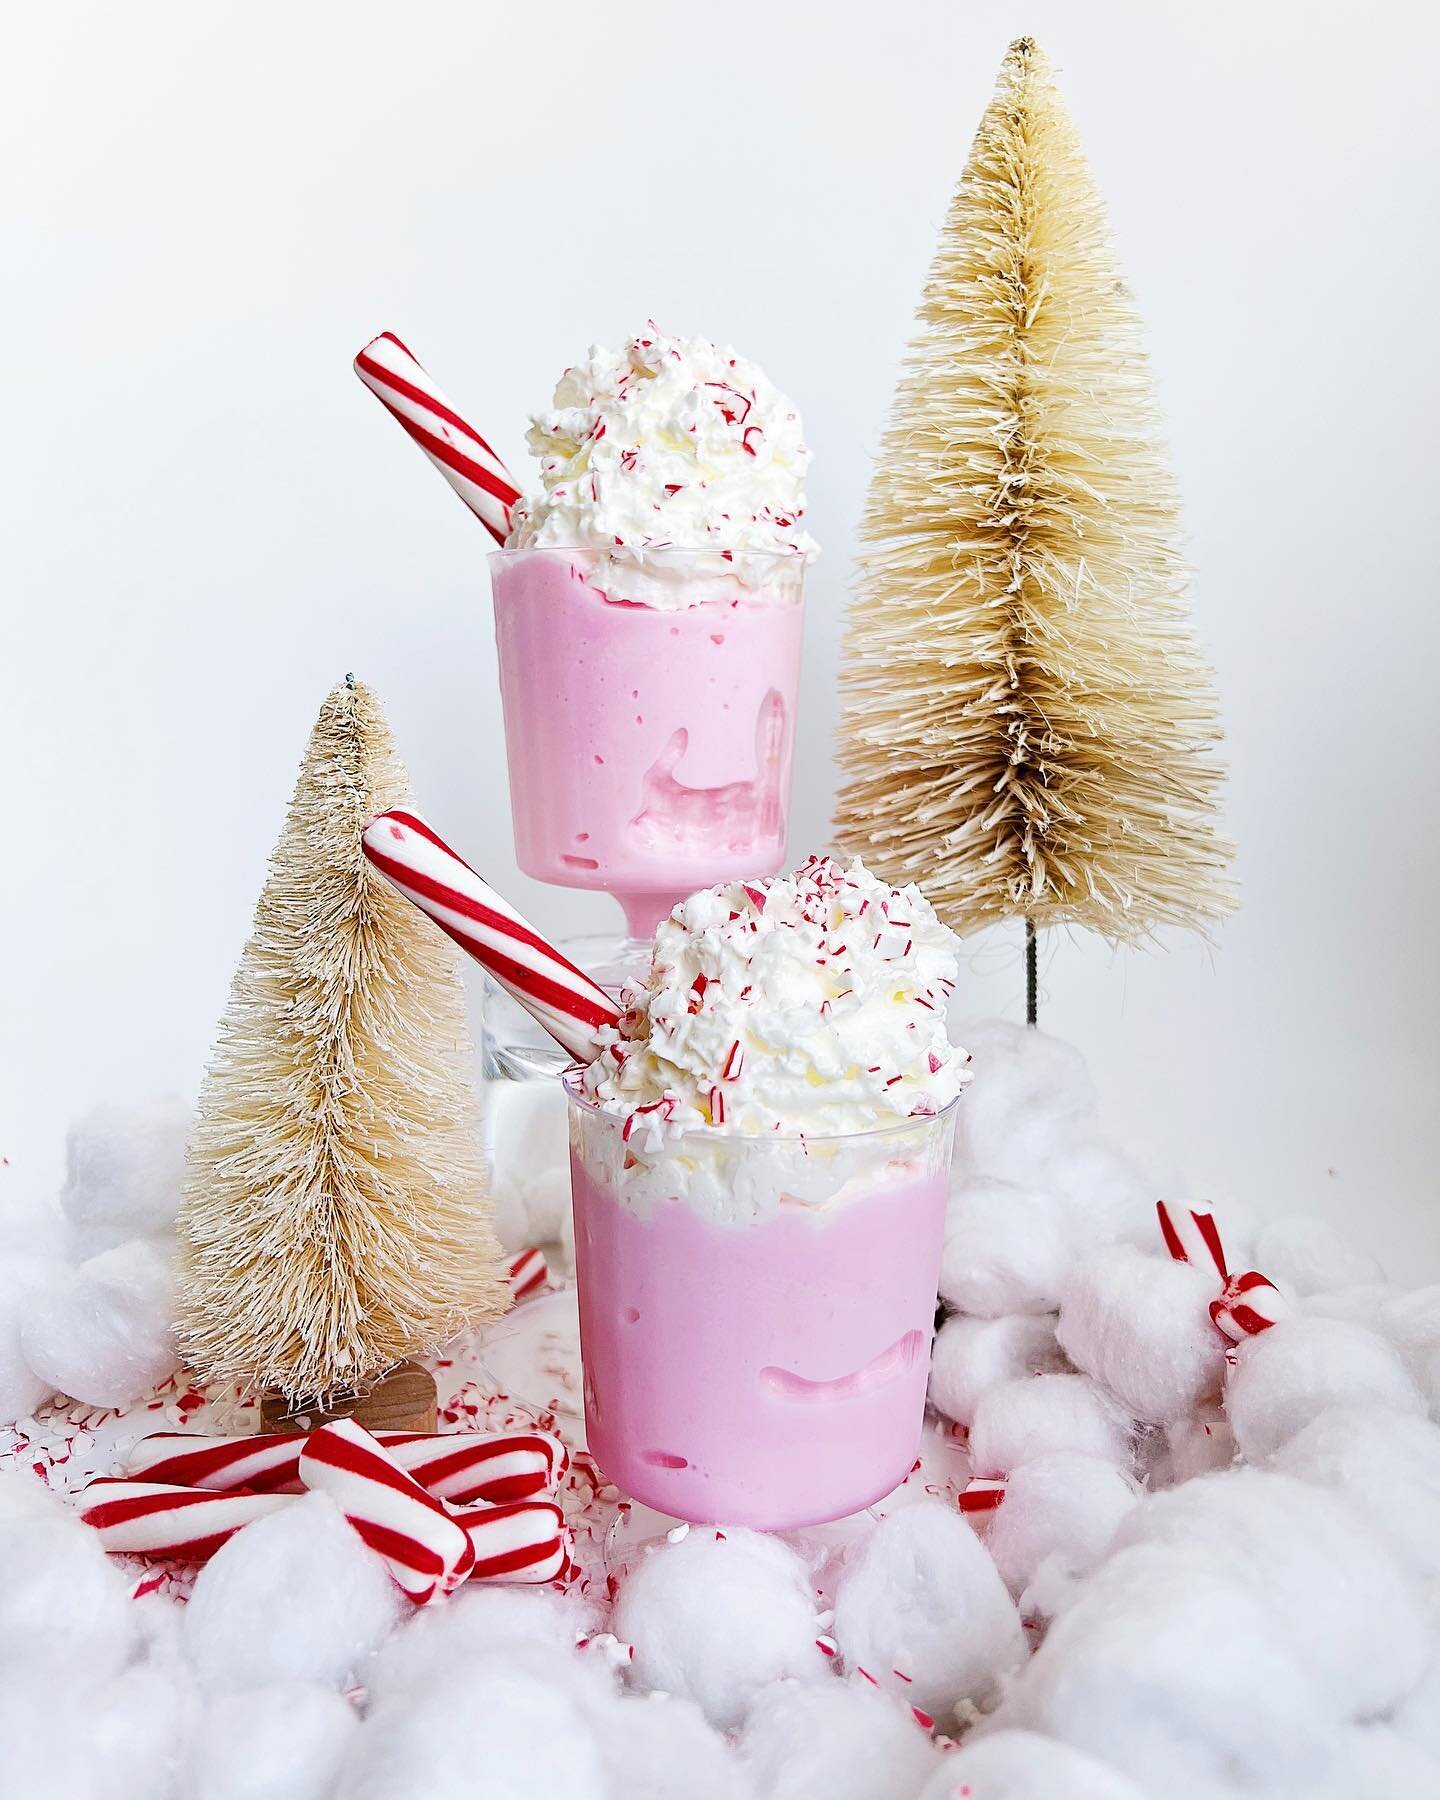 Christmas has passed but the holidays are still in full swing!! ❄️🎉
⁣
Did you know we create custom menus for private parties? Your favorite milkshake can be one of the options! Let us know below which flavor milkshake you would pick? ⁣
⁣⁣
#nitrogen